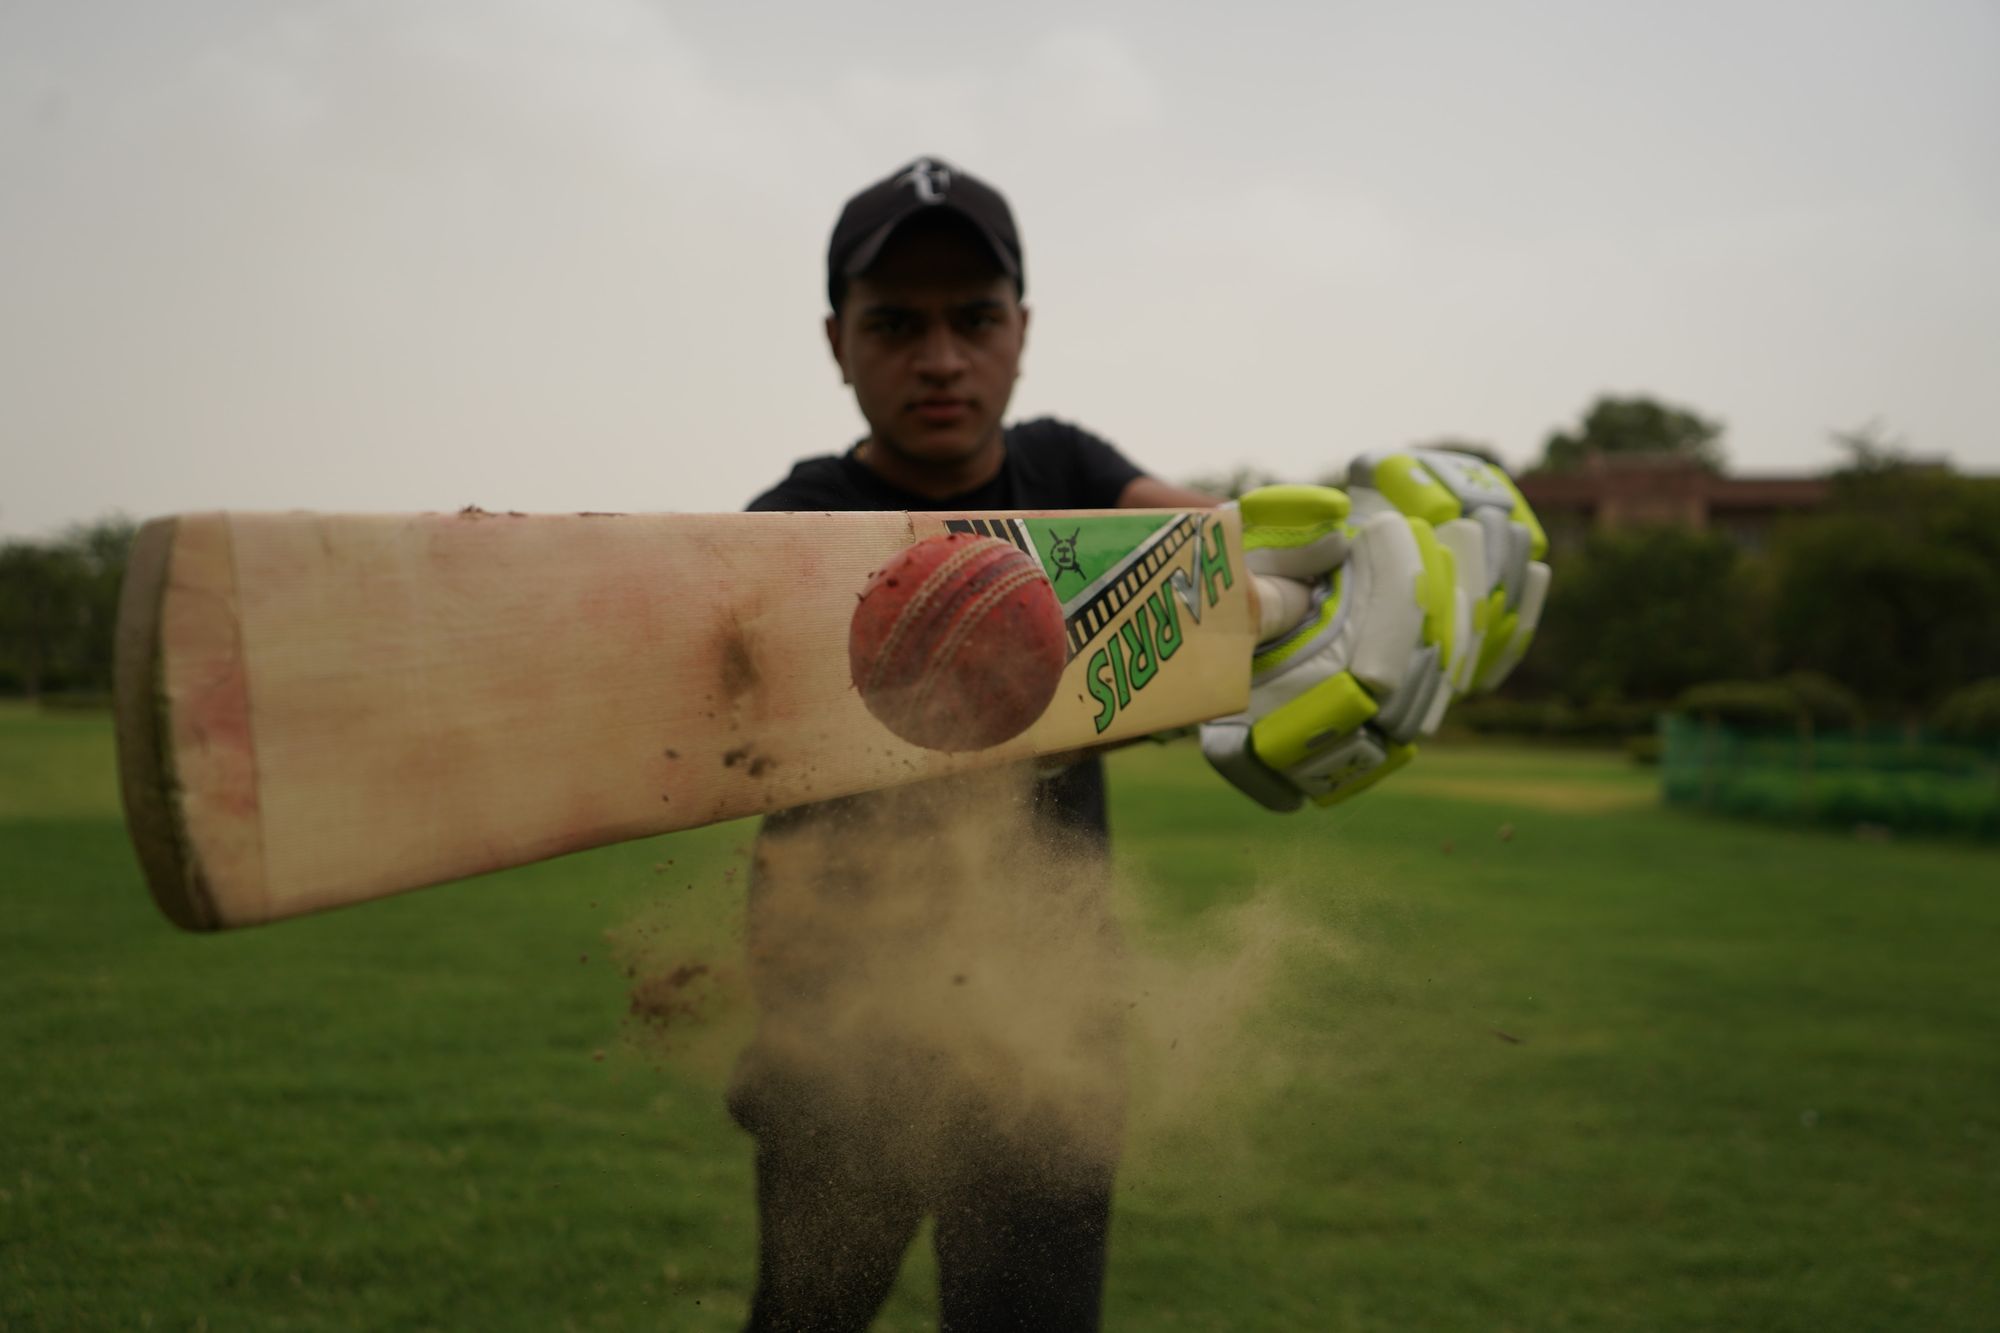 How cricket saved the day